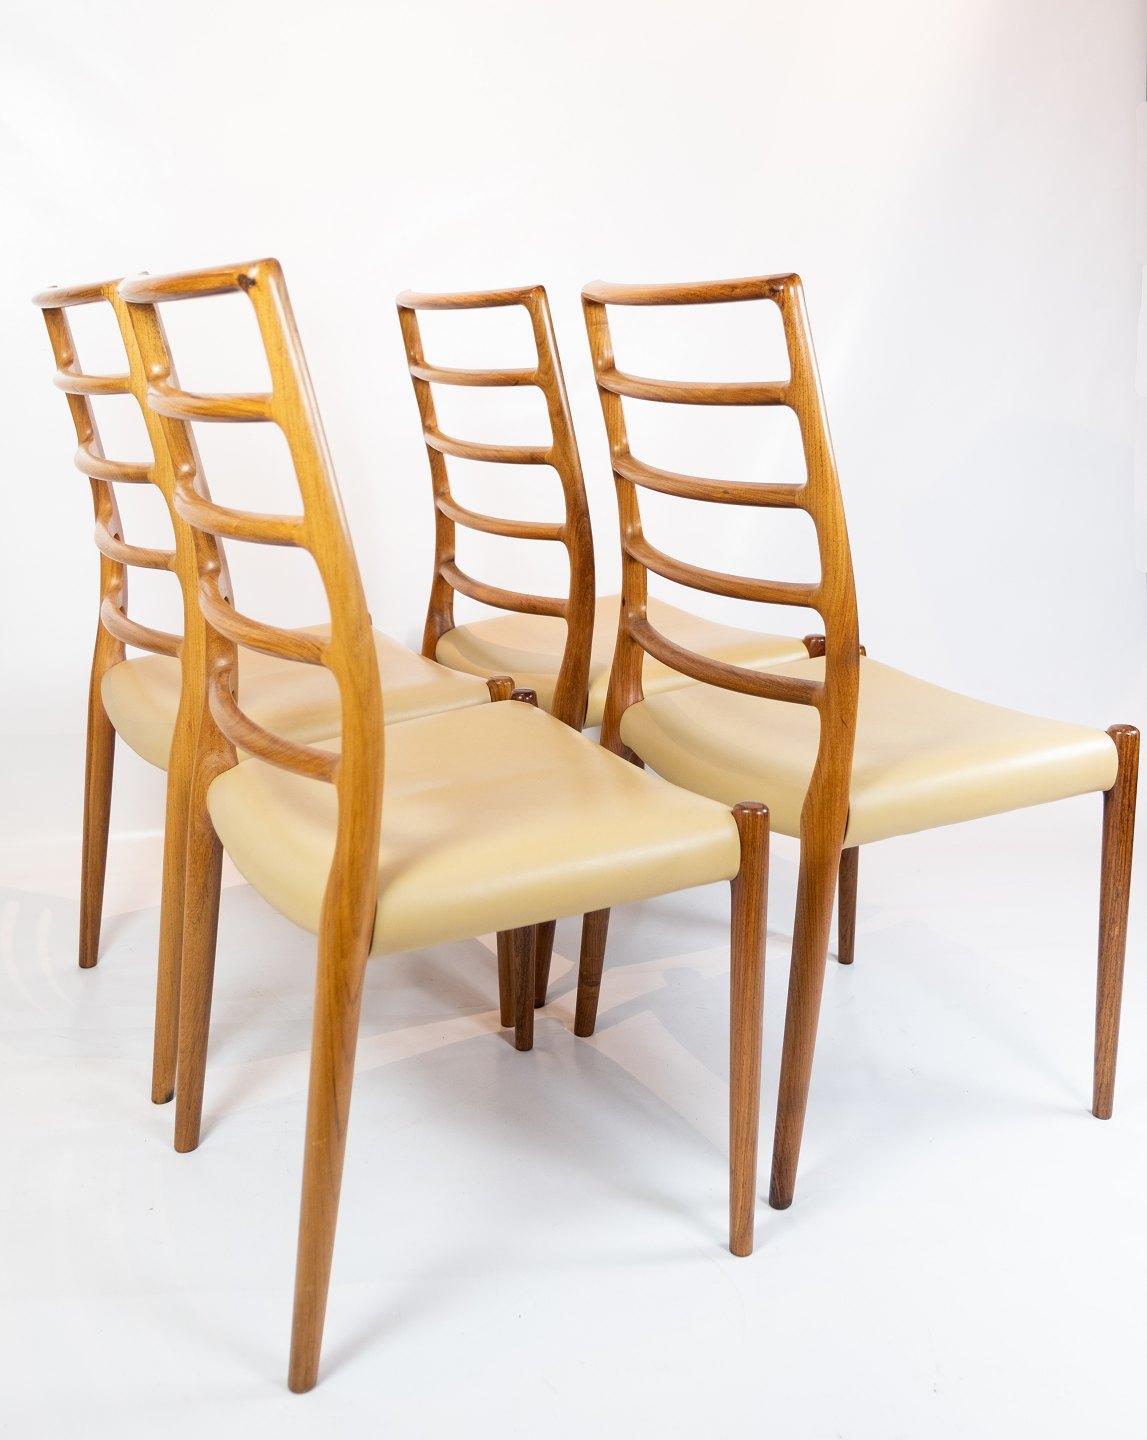 Scandinavian Modern Set of 8 Dining Chairs, Model 82, Designed by N.O. Møller from the 1960s